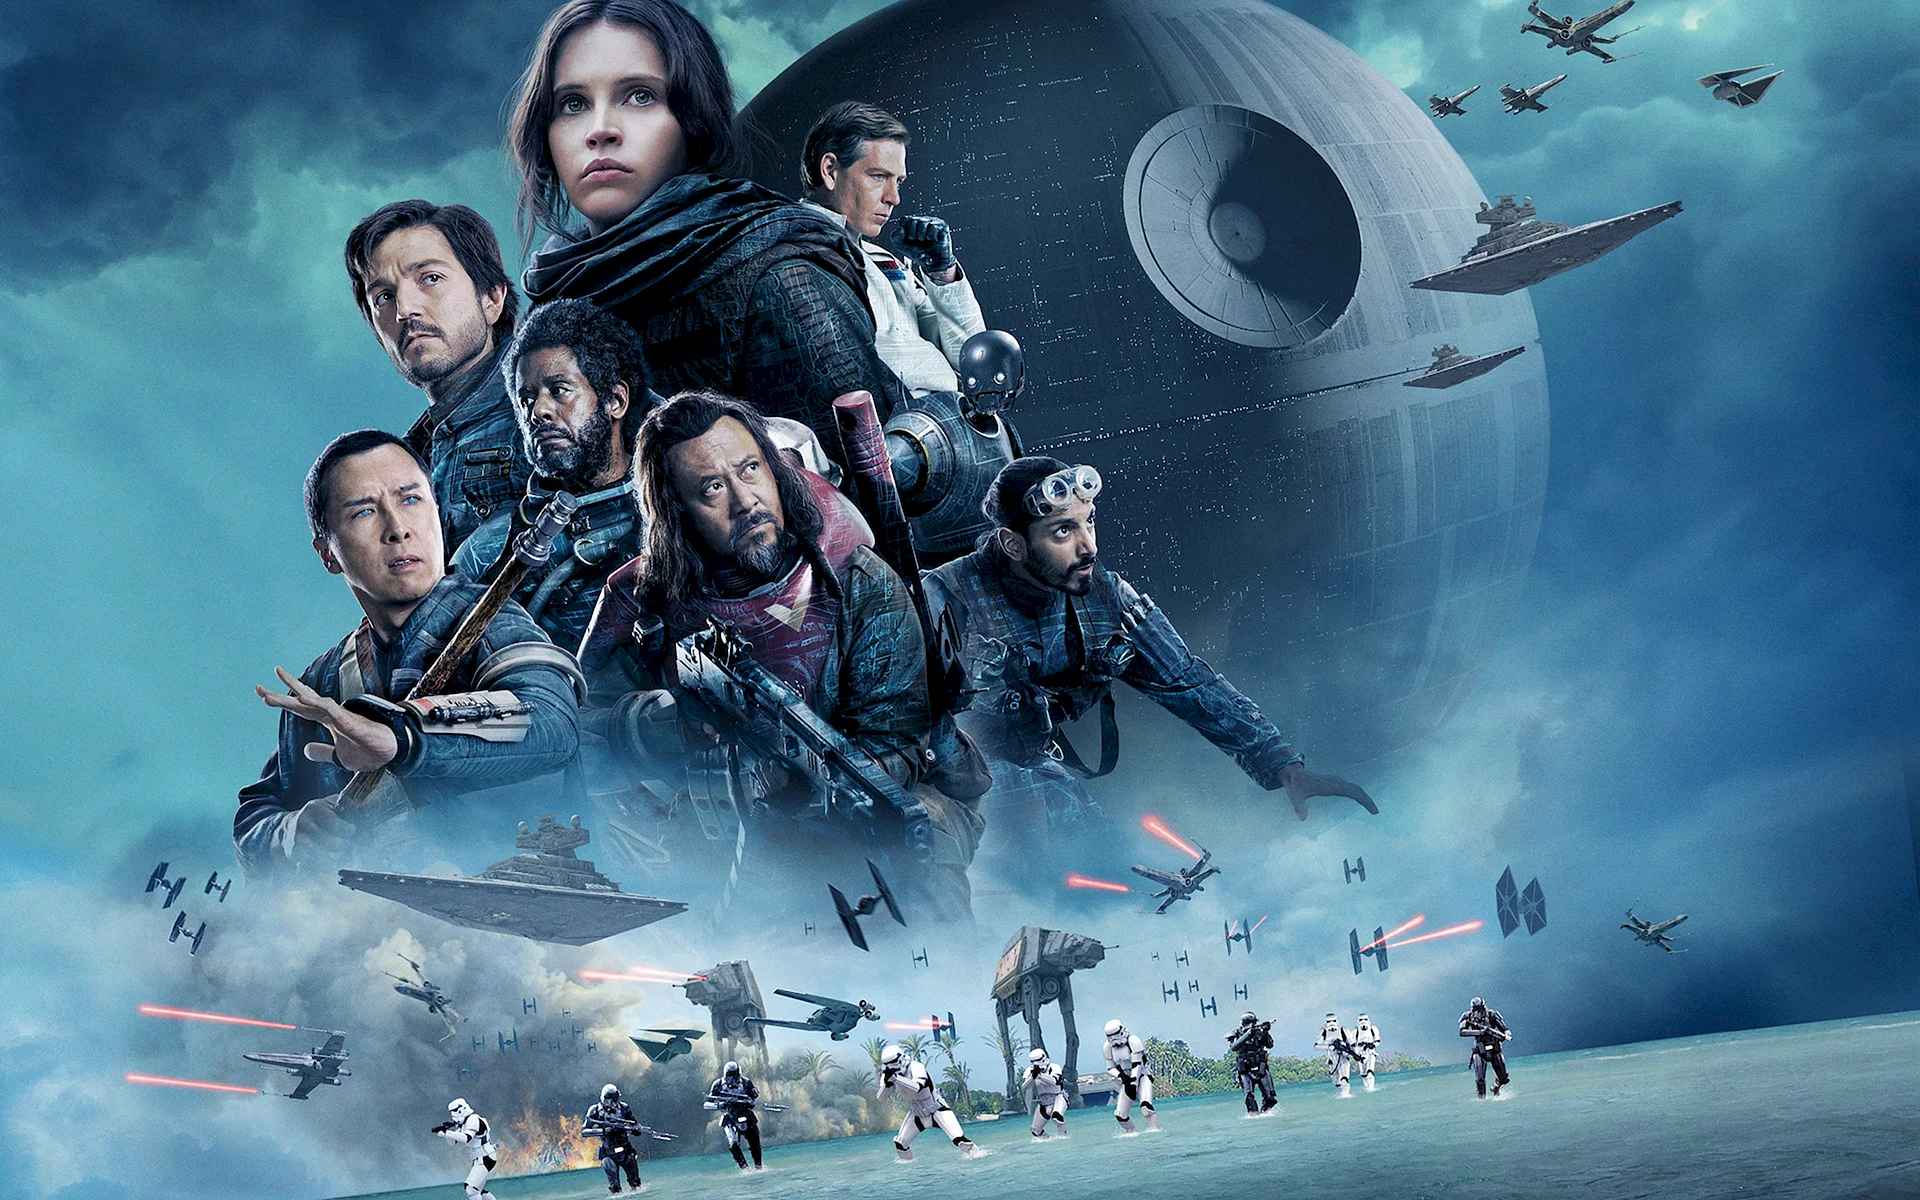 Rogue One A Star Wars Story Wallpaper